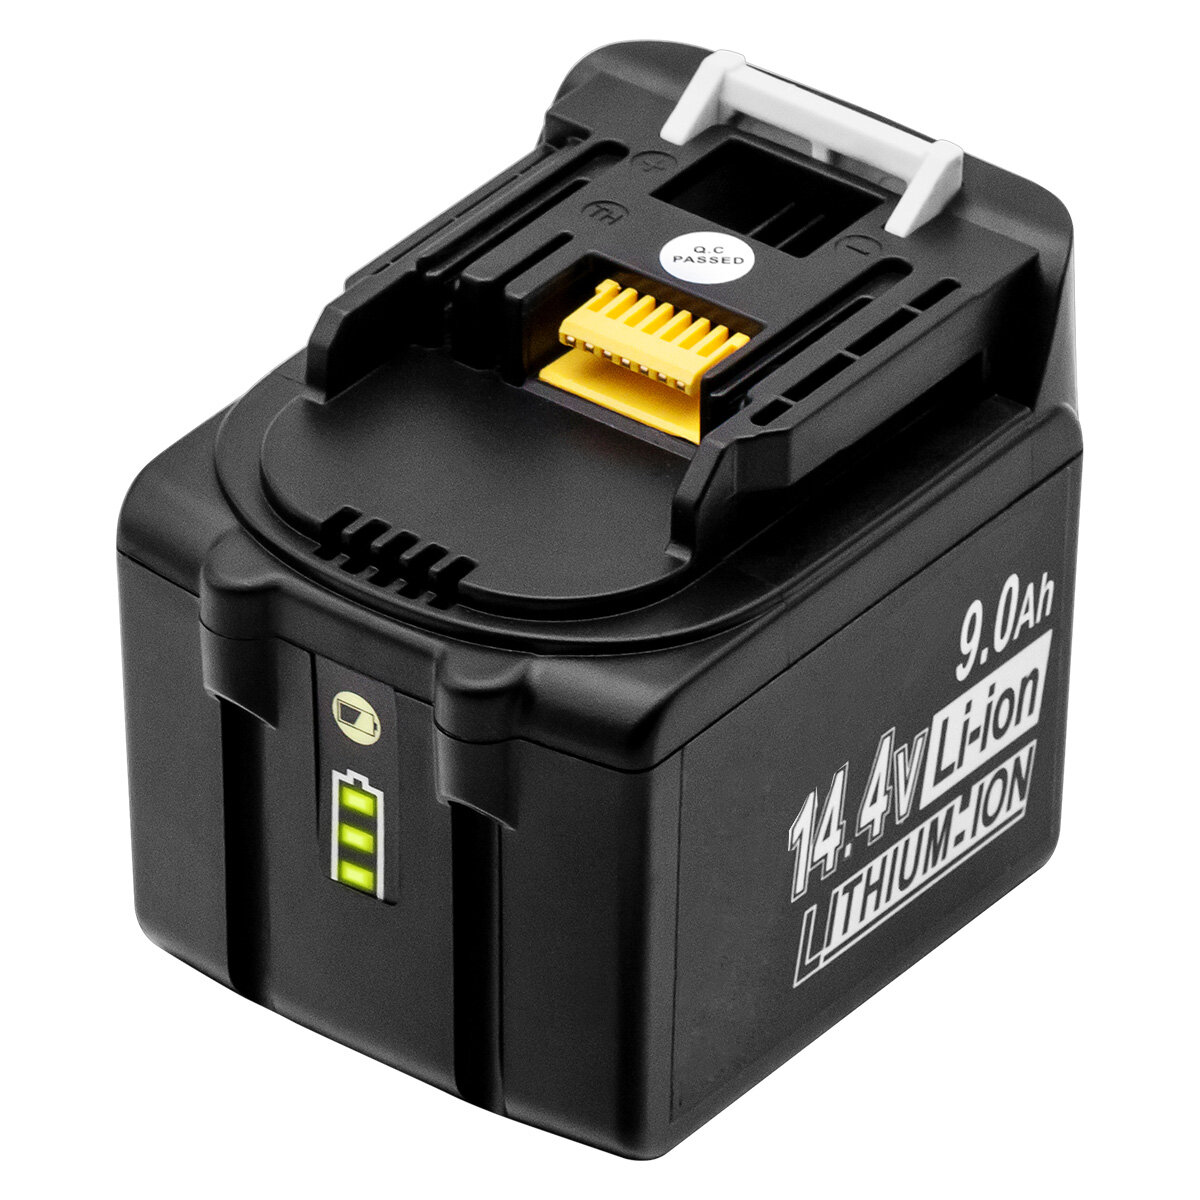 best price,9a,14.4v,li,ion,replacement,battery,for,makita,bl1490,eu,coupon,price,discount